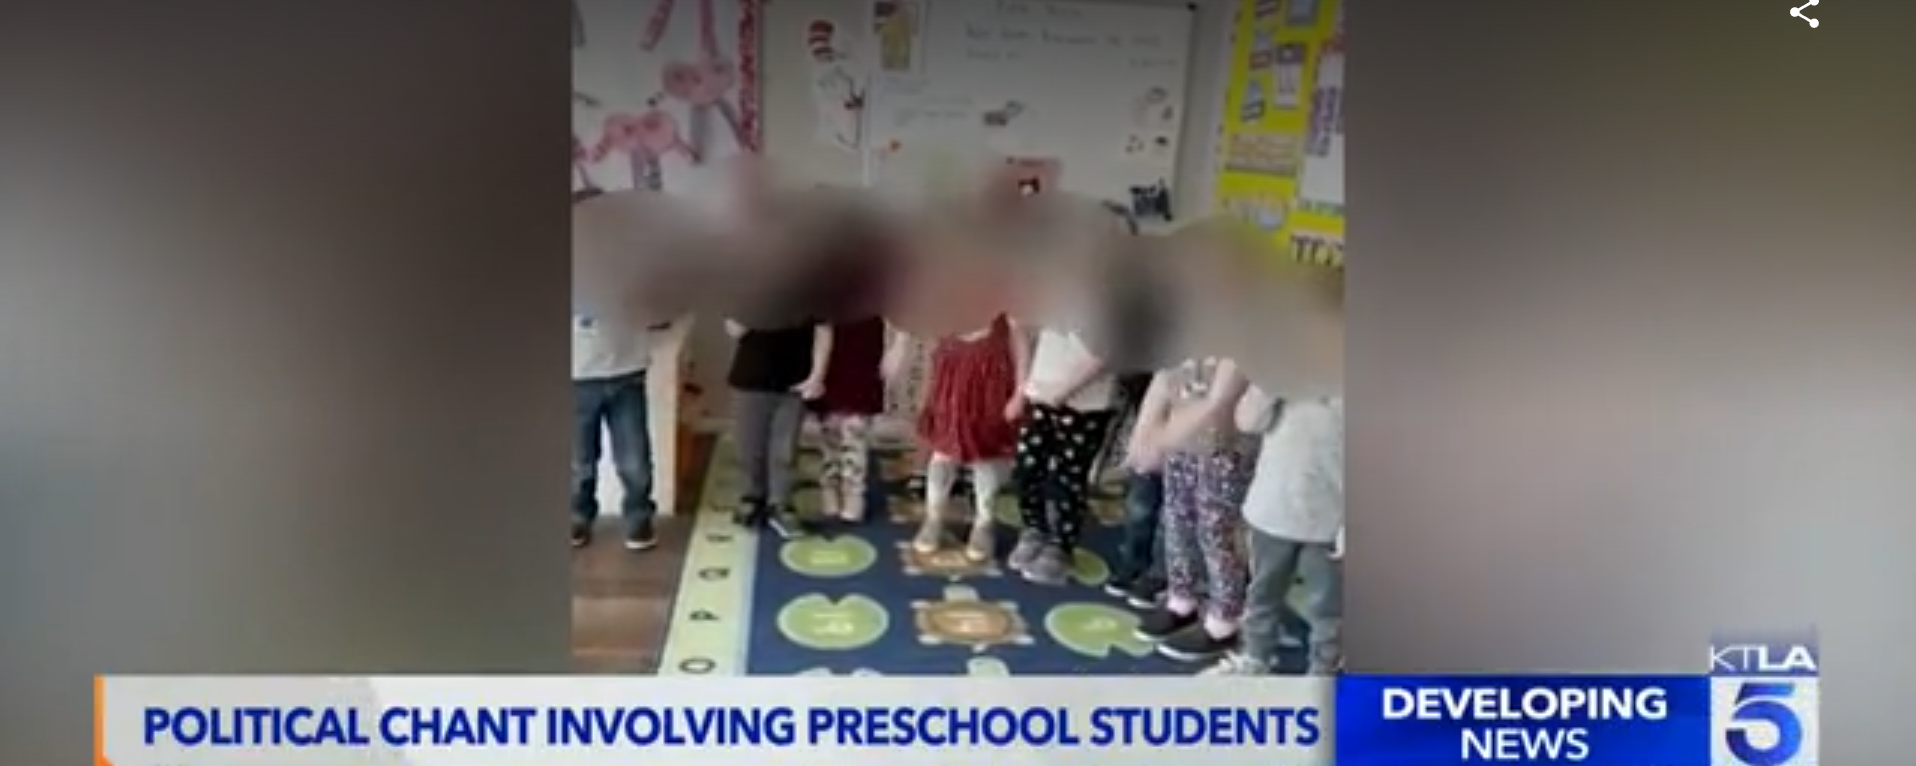 ‘We want him out’: Controversy brews after video shows Norco preschoolers chanting against Biden